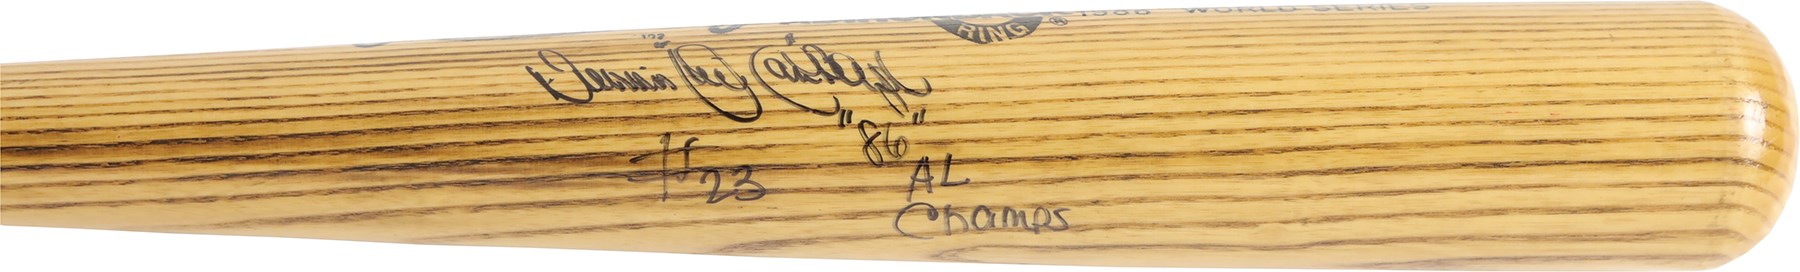 Baseball Equipment - 1986 "Oil Can" Boyd Autographed Game Issued World Series Bat